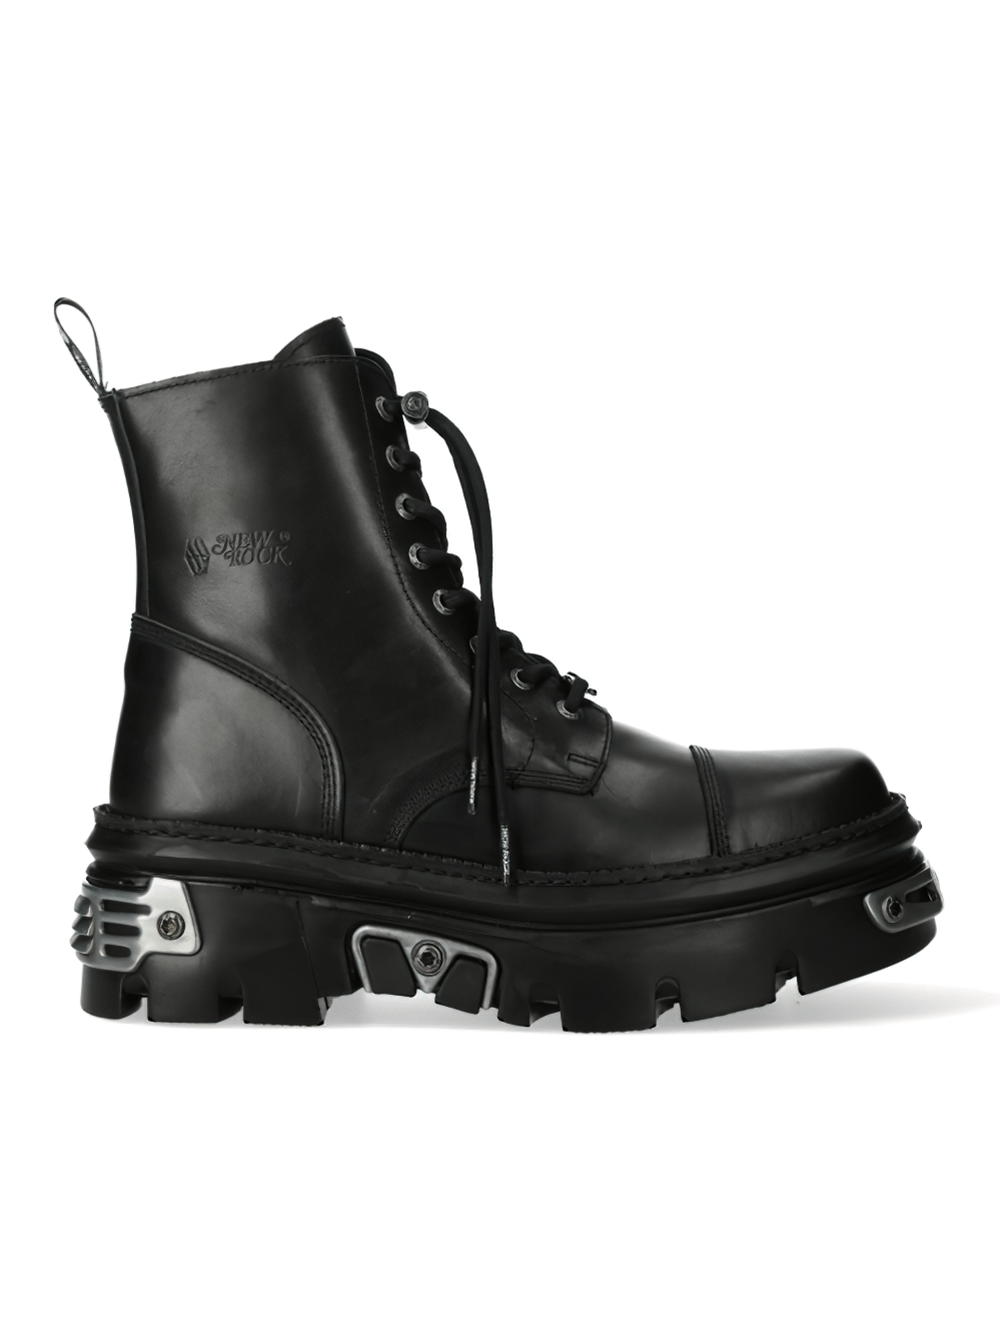 NEW ROCK Bold Black Military Leather Ankle Boots